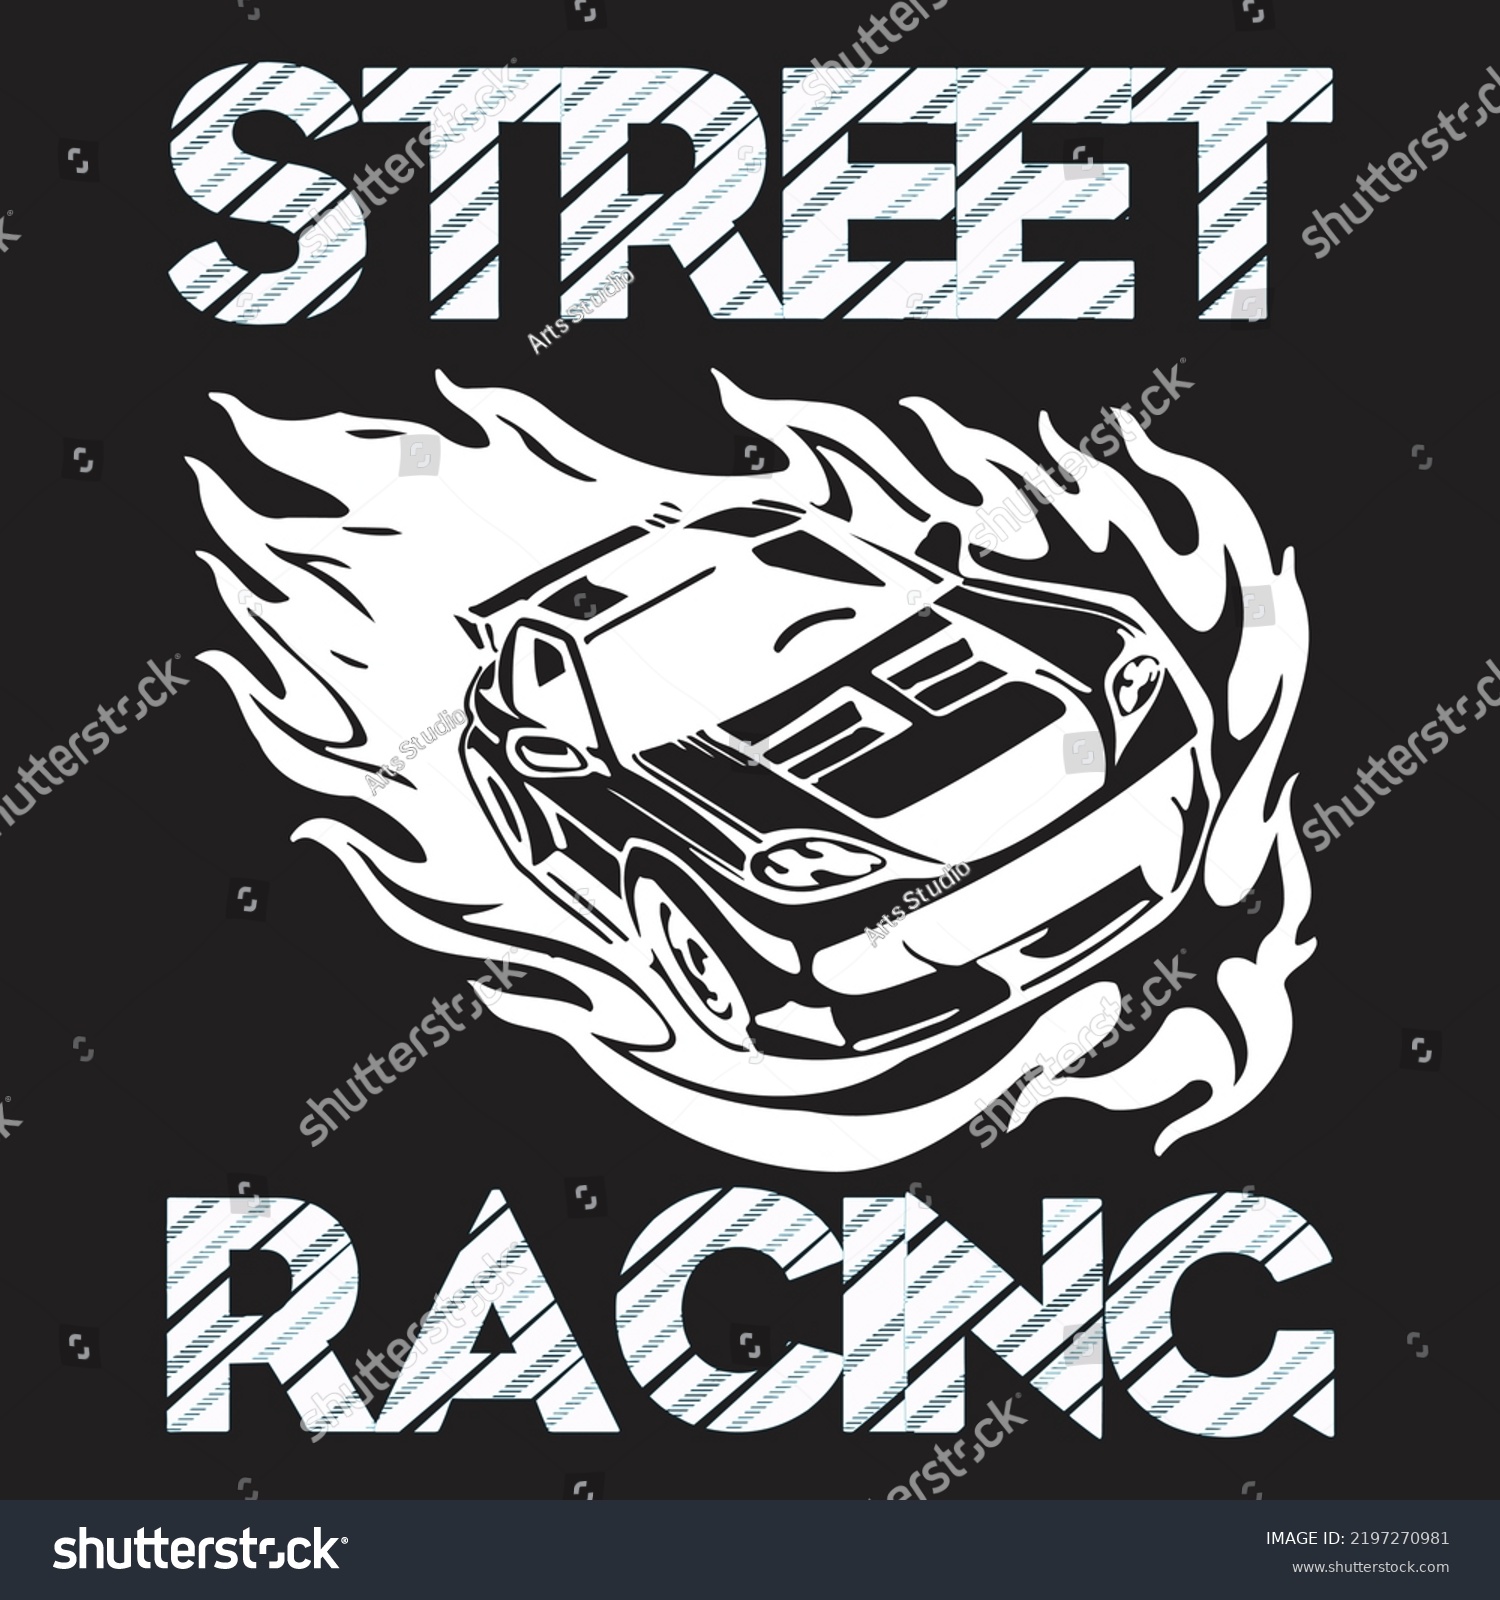 SVG of Street Racing Championship - Sports and Athletic T-shirt Design Template Vector and Sports vector illustration. Vector EPS Editable File Bundle, can you download this file. svg